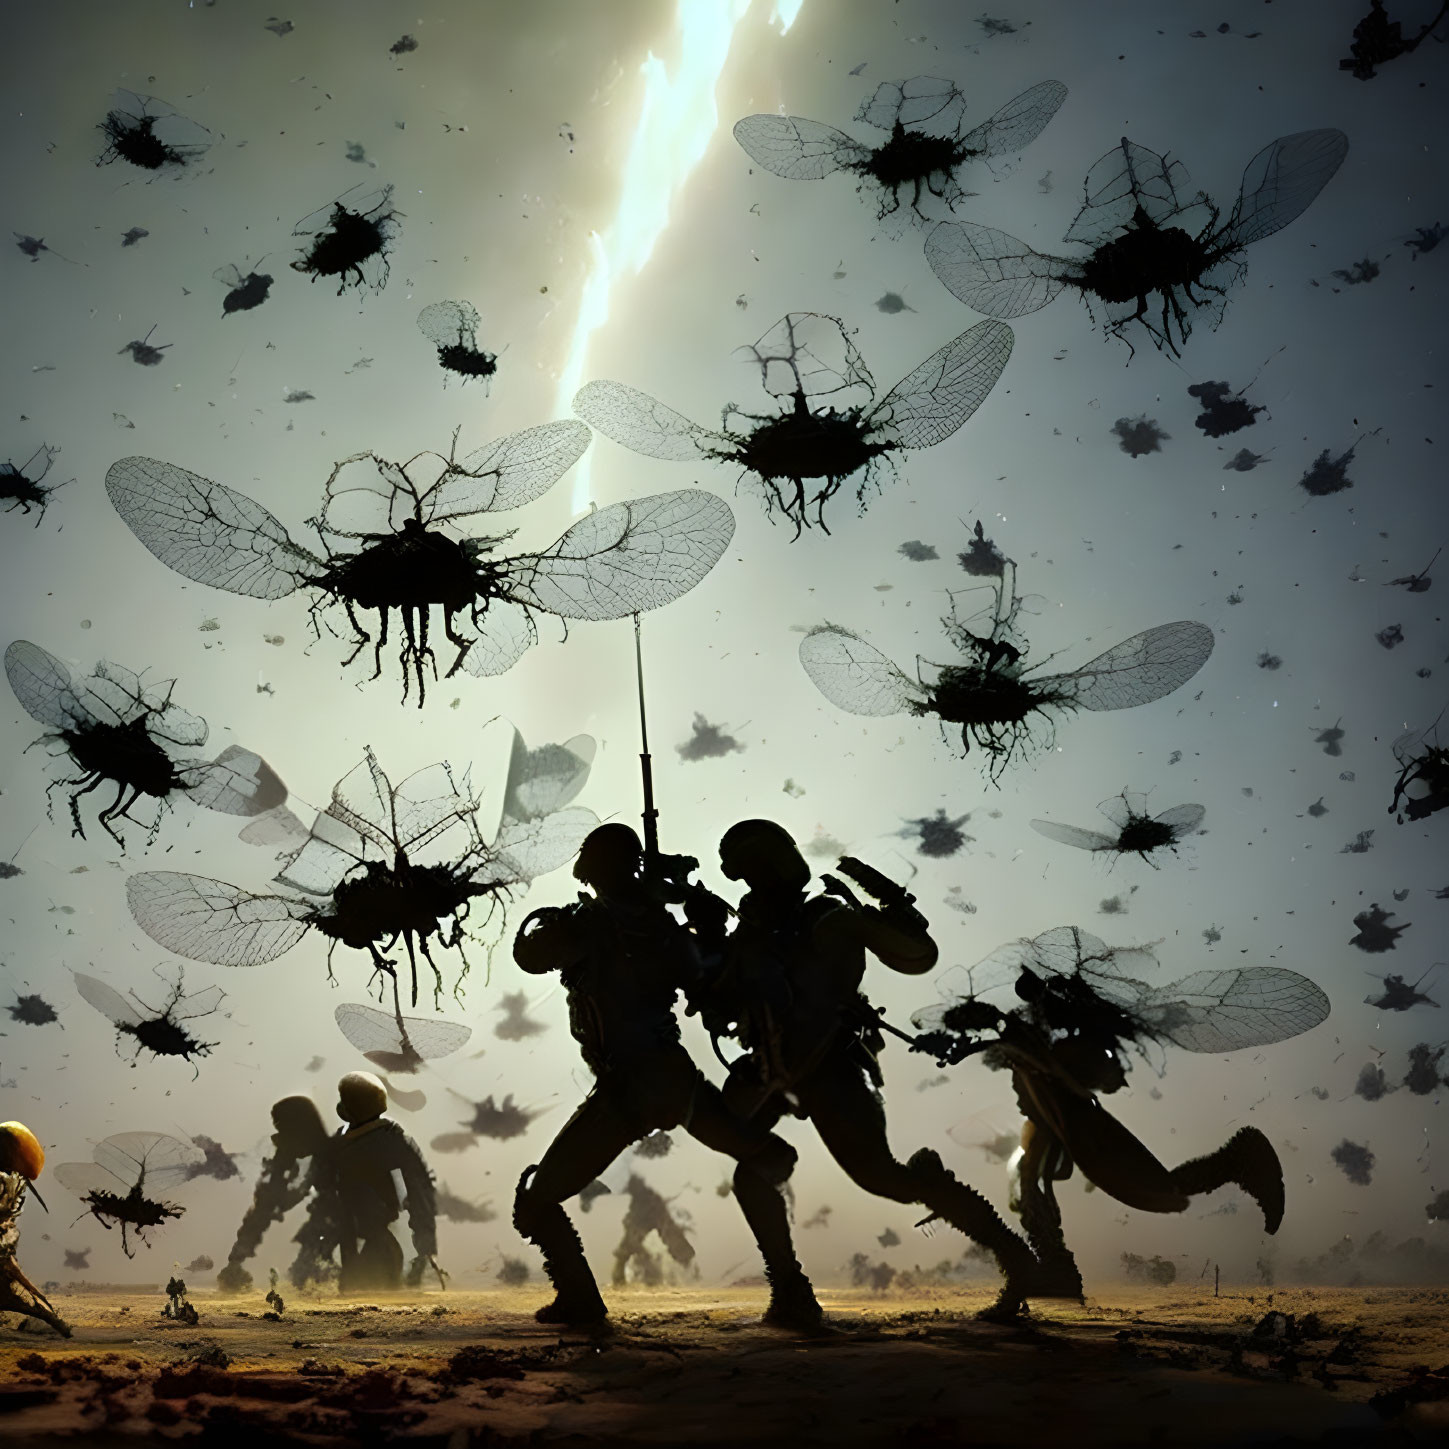 A Swarm of Alien Insects Attack the Human Settlers